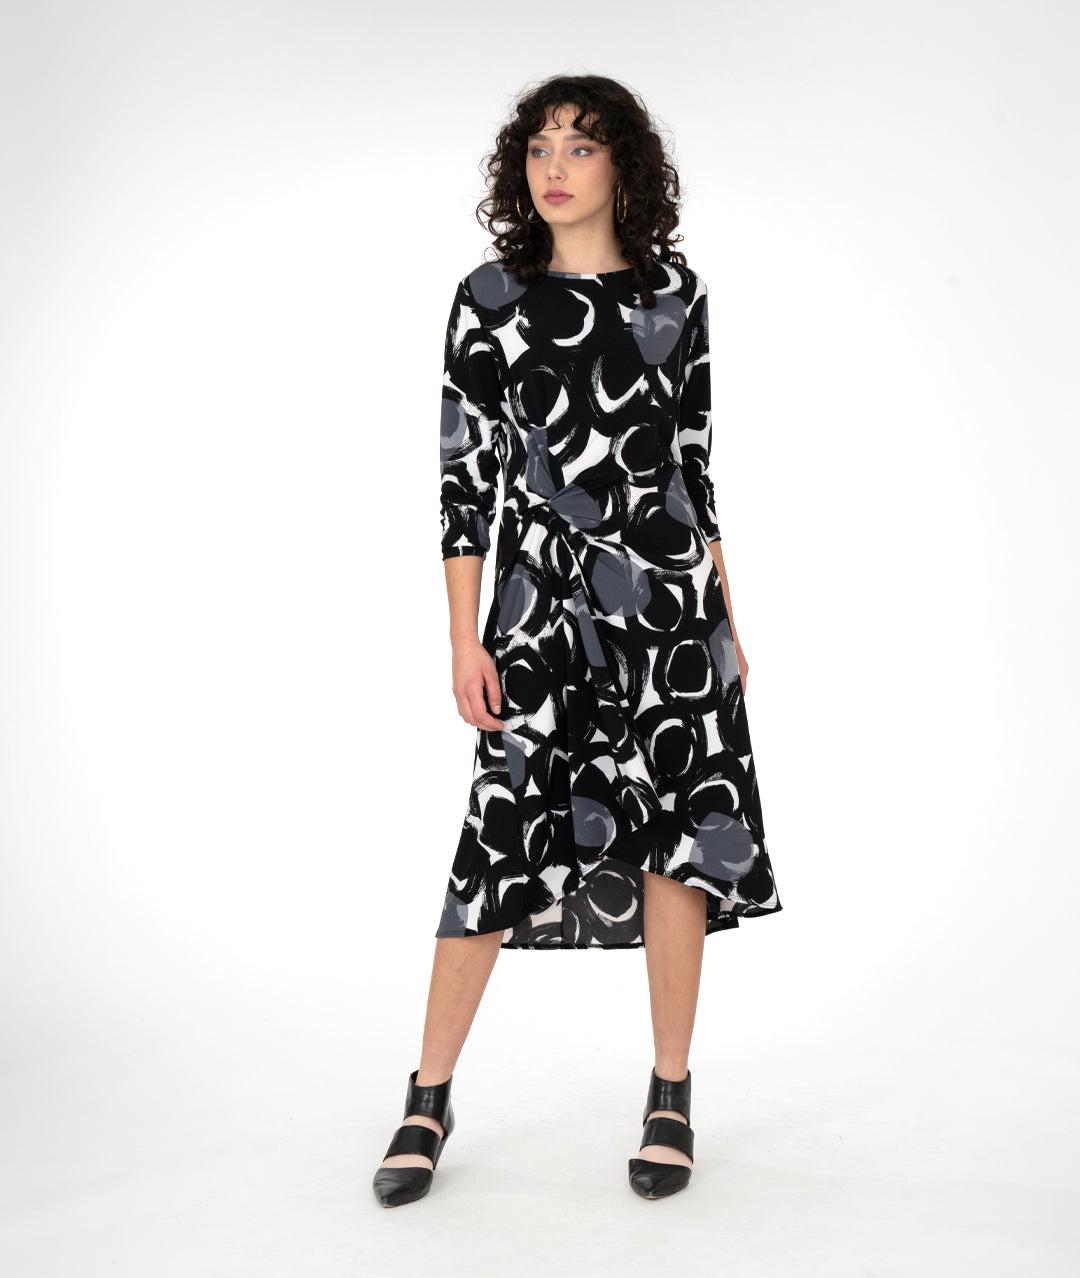 model in a black, white and grey circle print dress with a knot detail on one hip